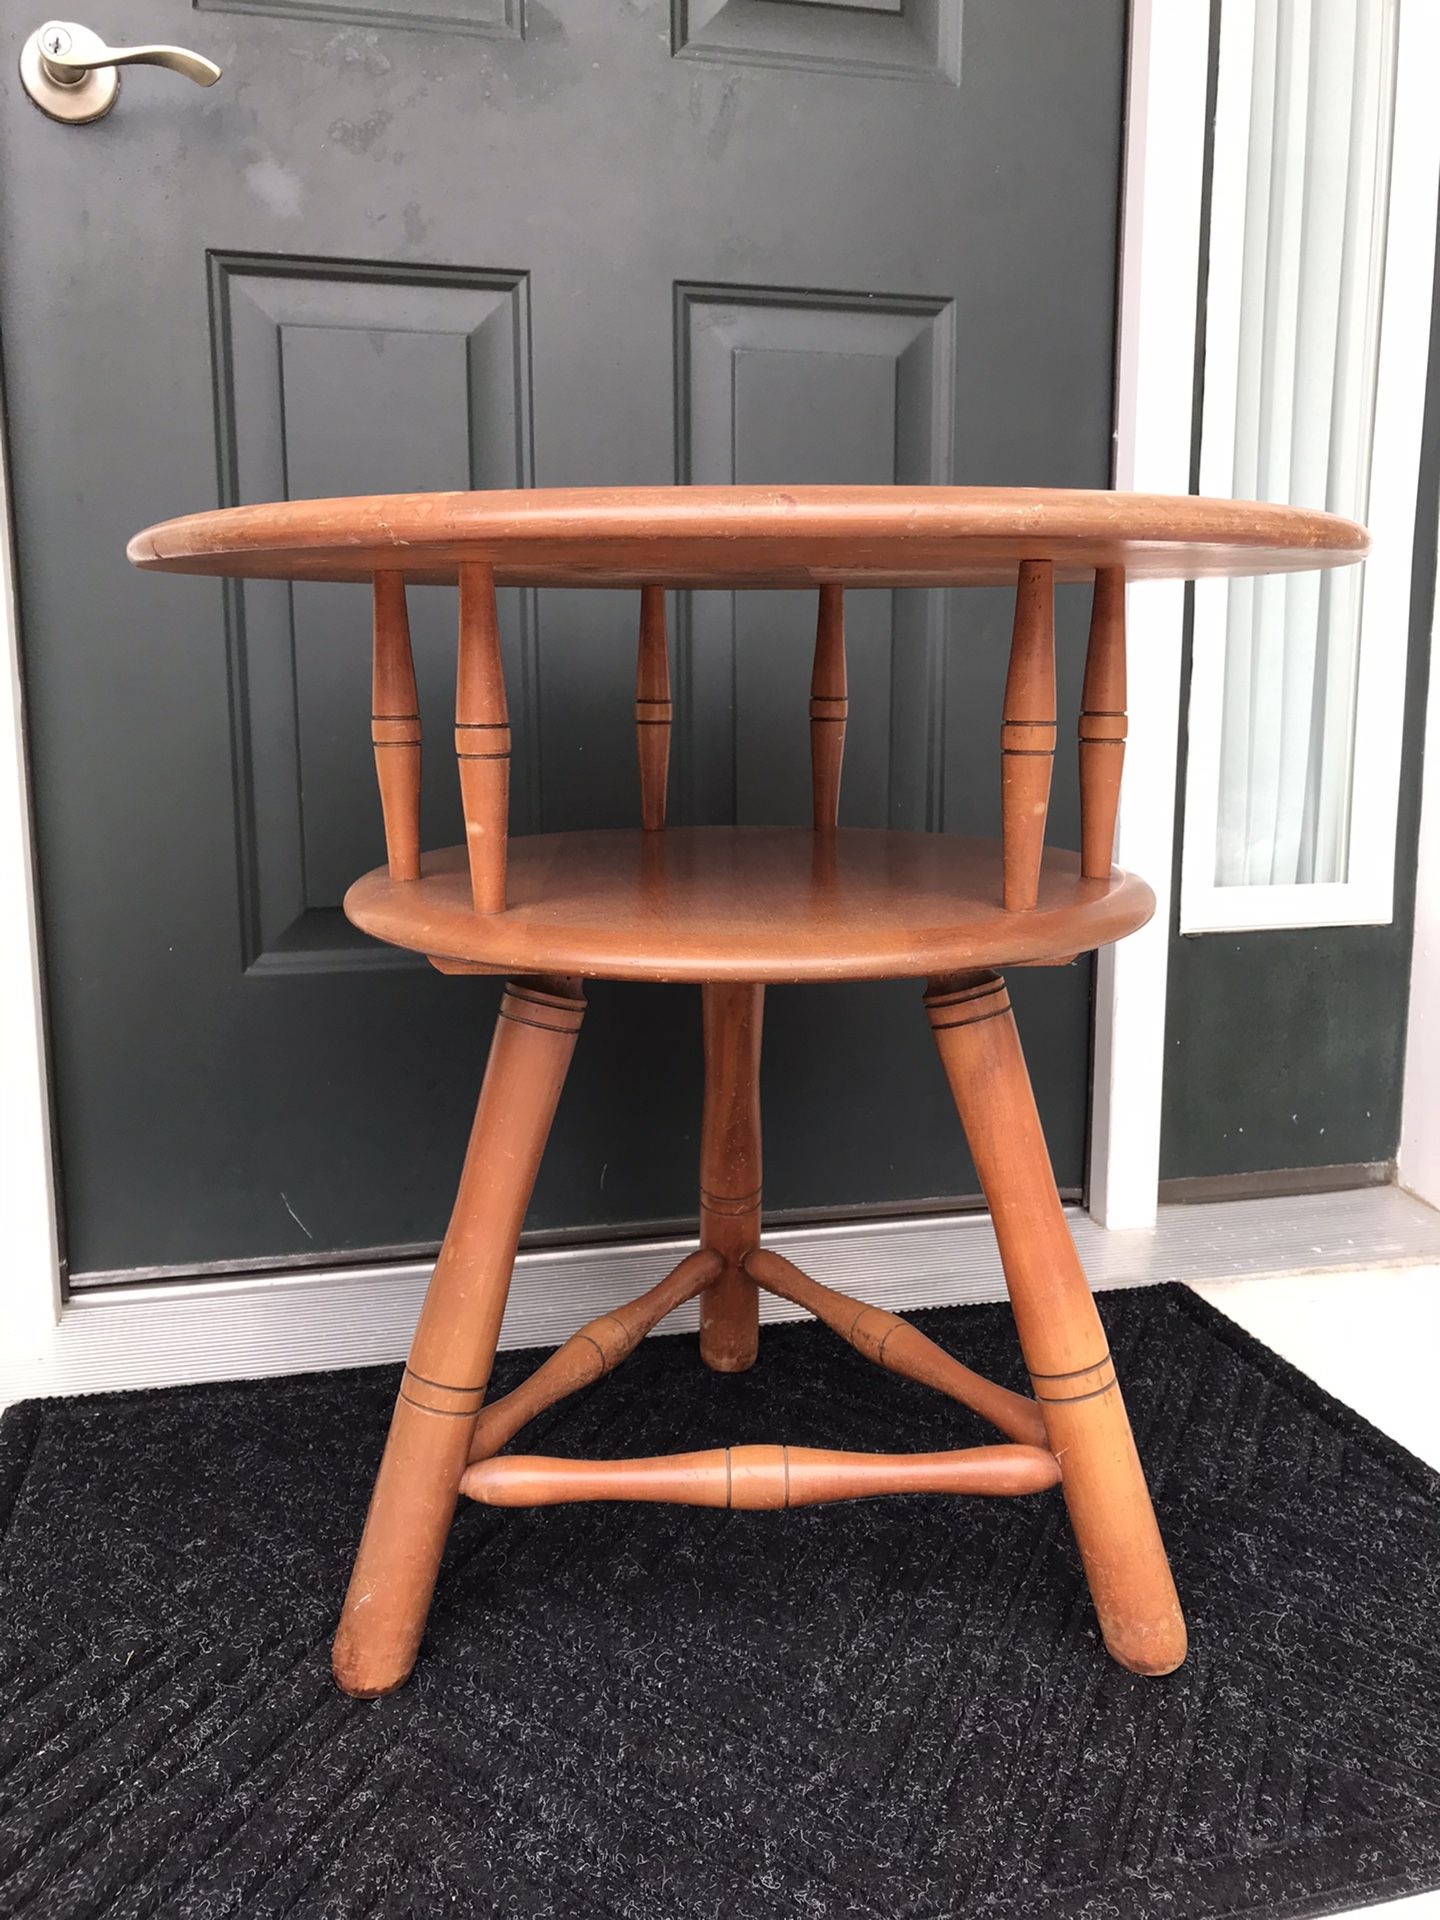 Antique small round table